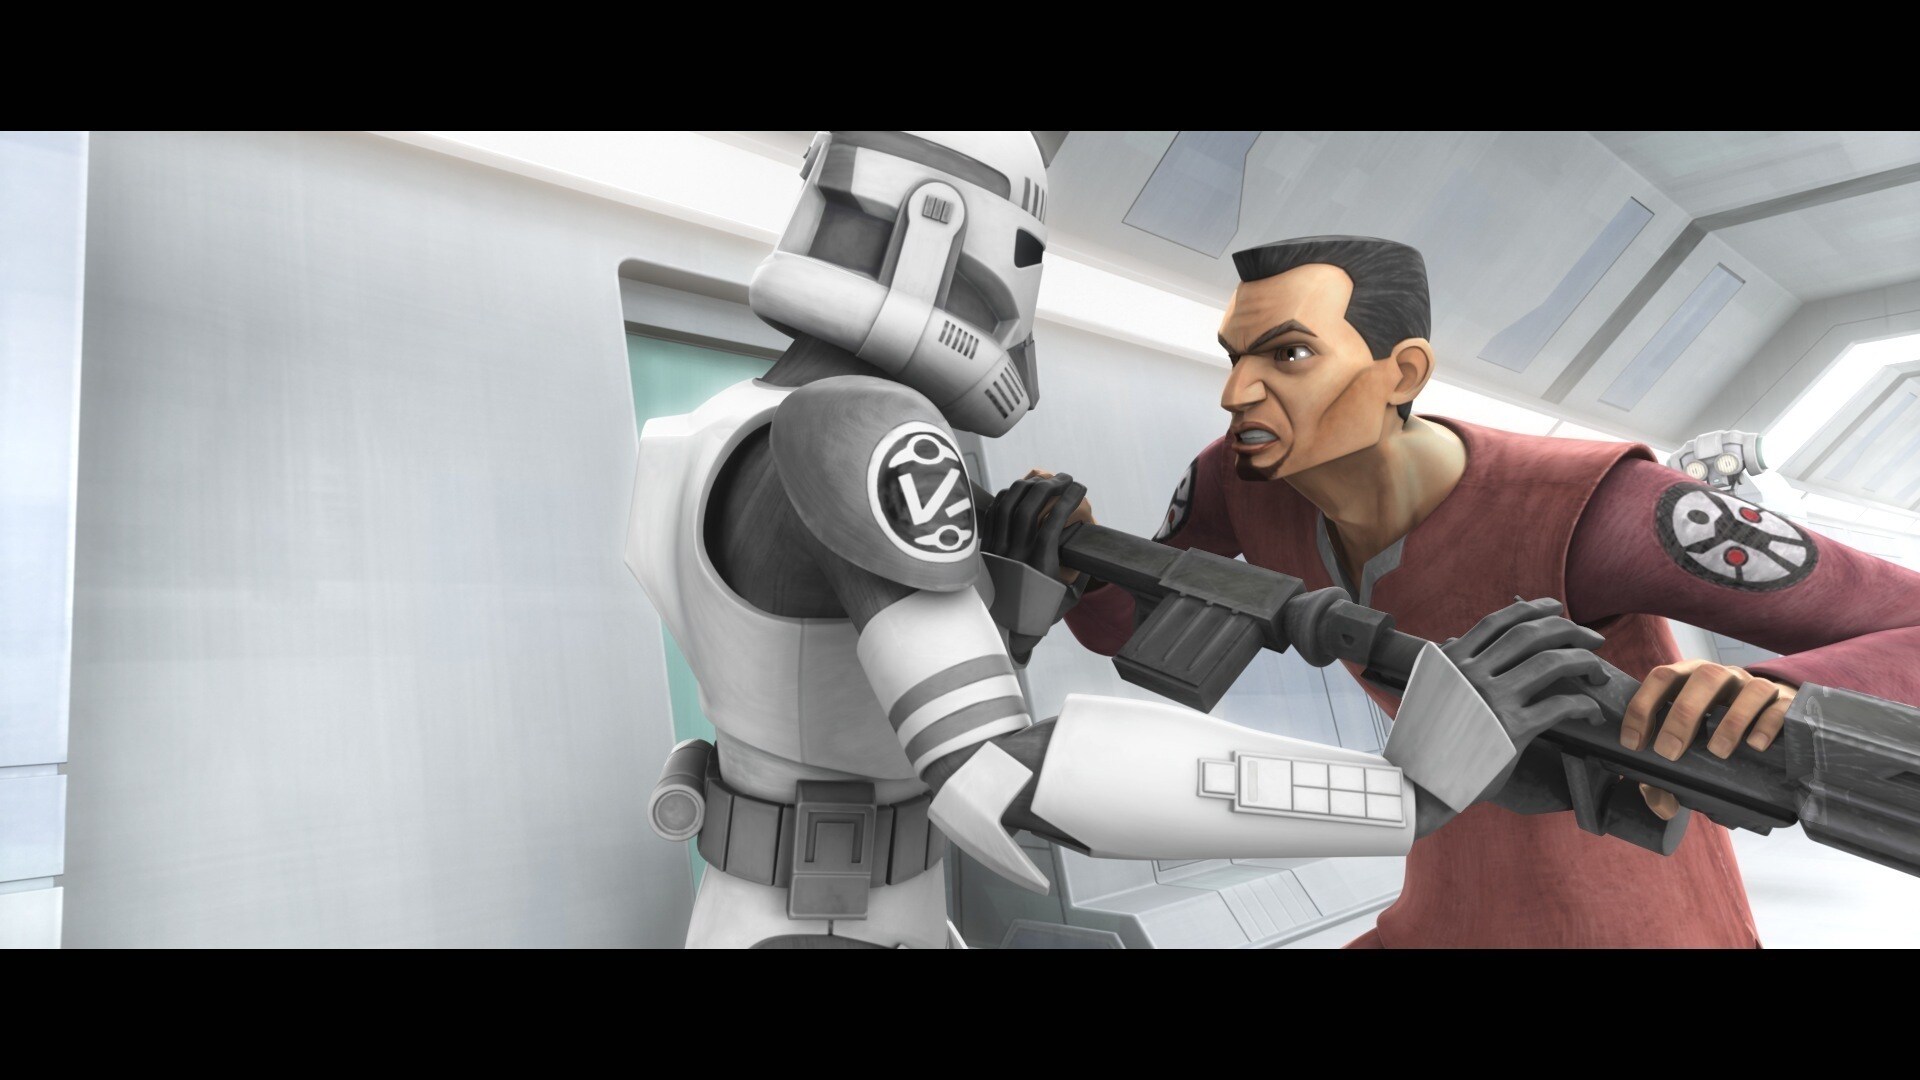 Fives is marched down a corridor by clone troopers and a Kaminoan scientist and passes AZI-3 who ...